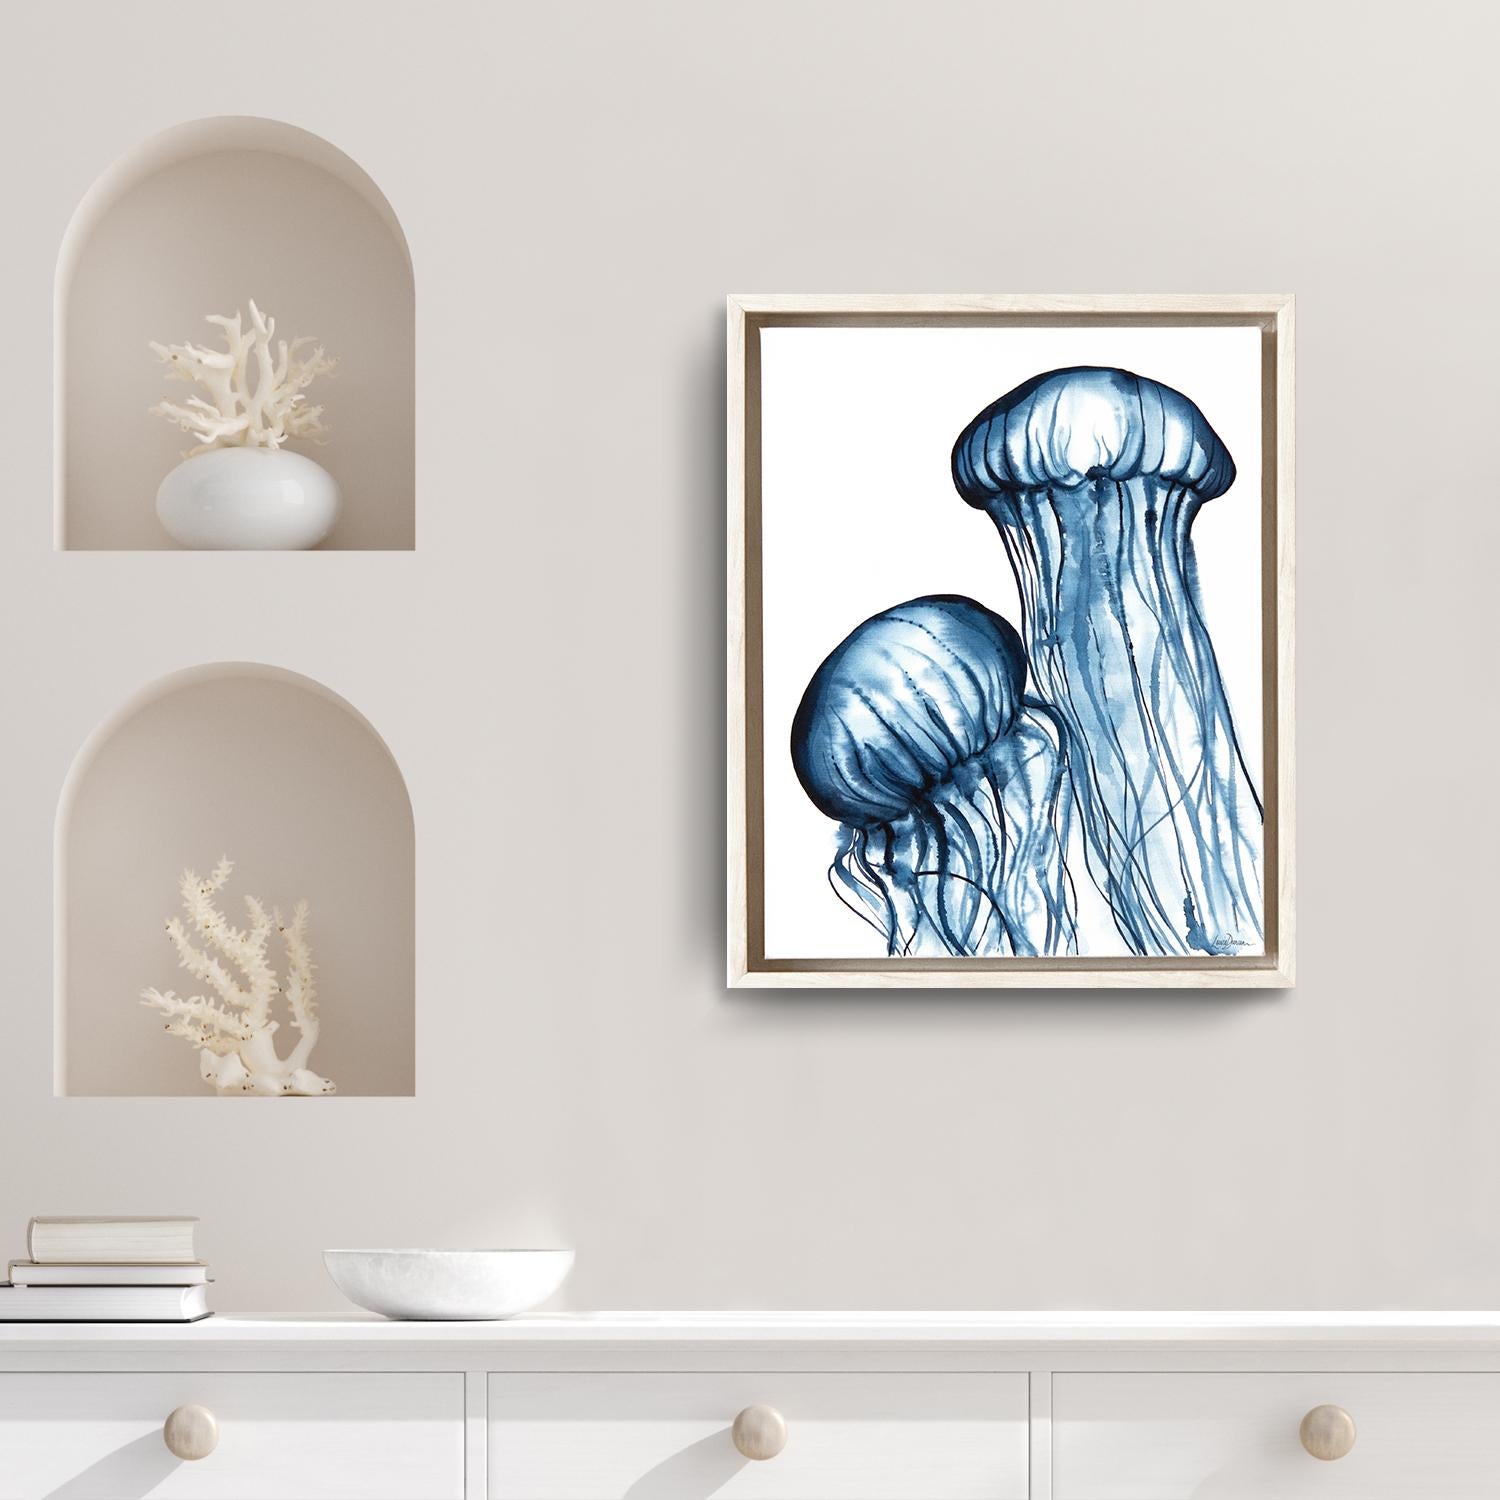 'Dancing Jellies' Framed Canvas Original Watercolor Painting by Laurie Duncan  1